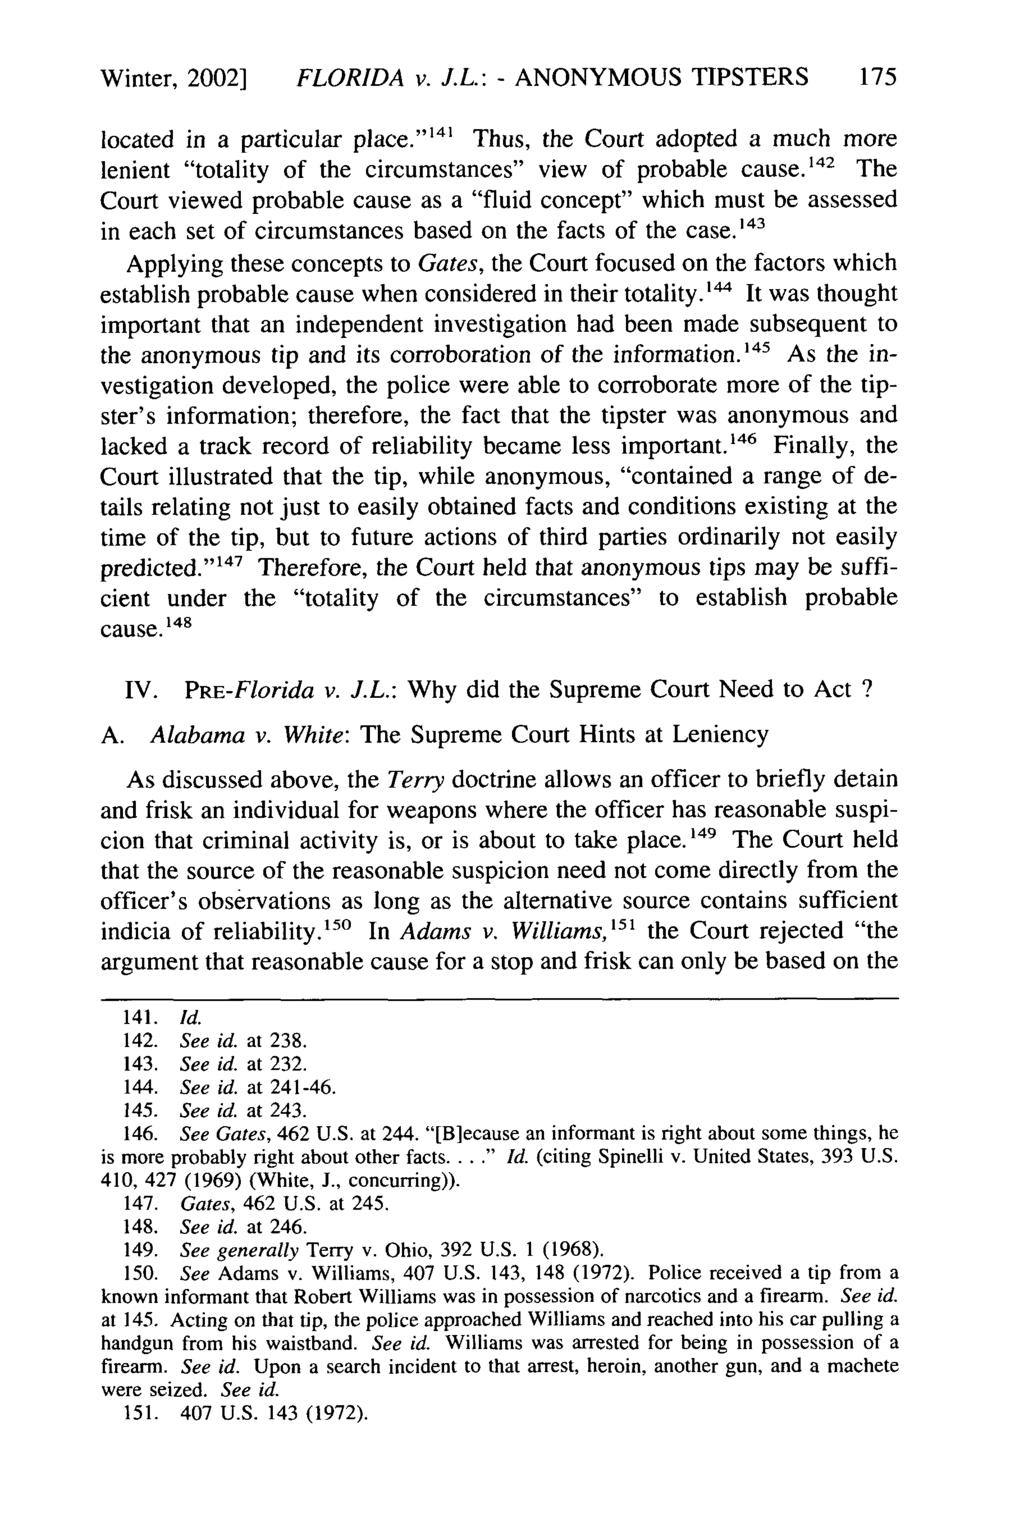 Winter, 2002] FLORIDA v. J.L.: - ANONYMOUS TIPSTERS located in a particular place."" 14 Thus, the Court adopted a much more lenient "totality of the circumstances" view of probable cause.